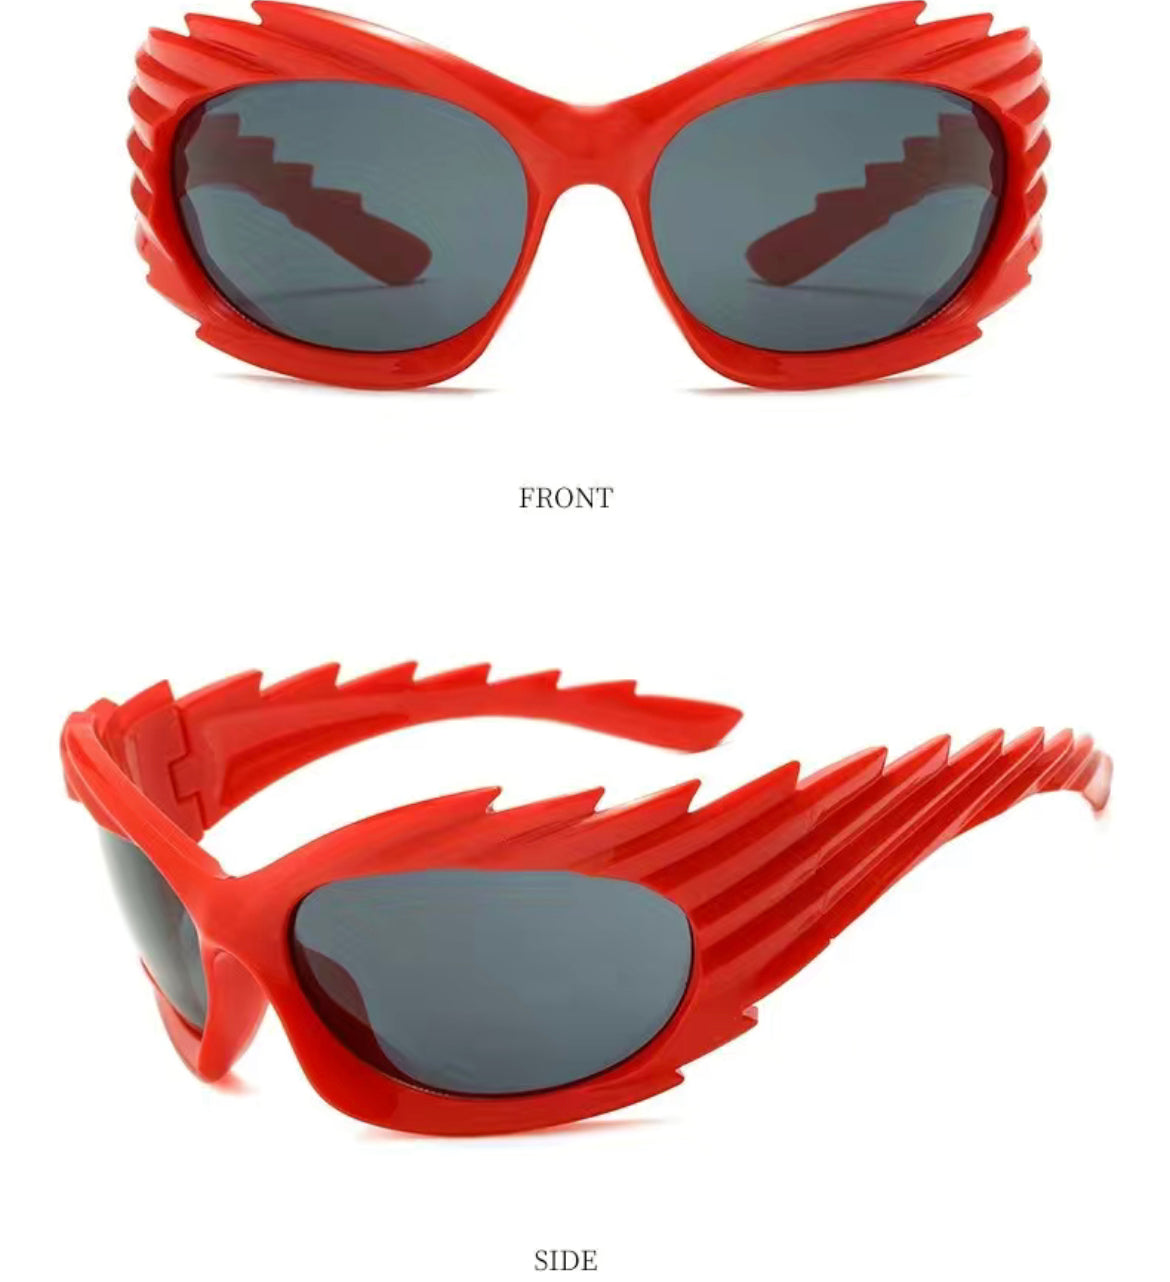 Space Face (red) Sunglasses